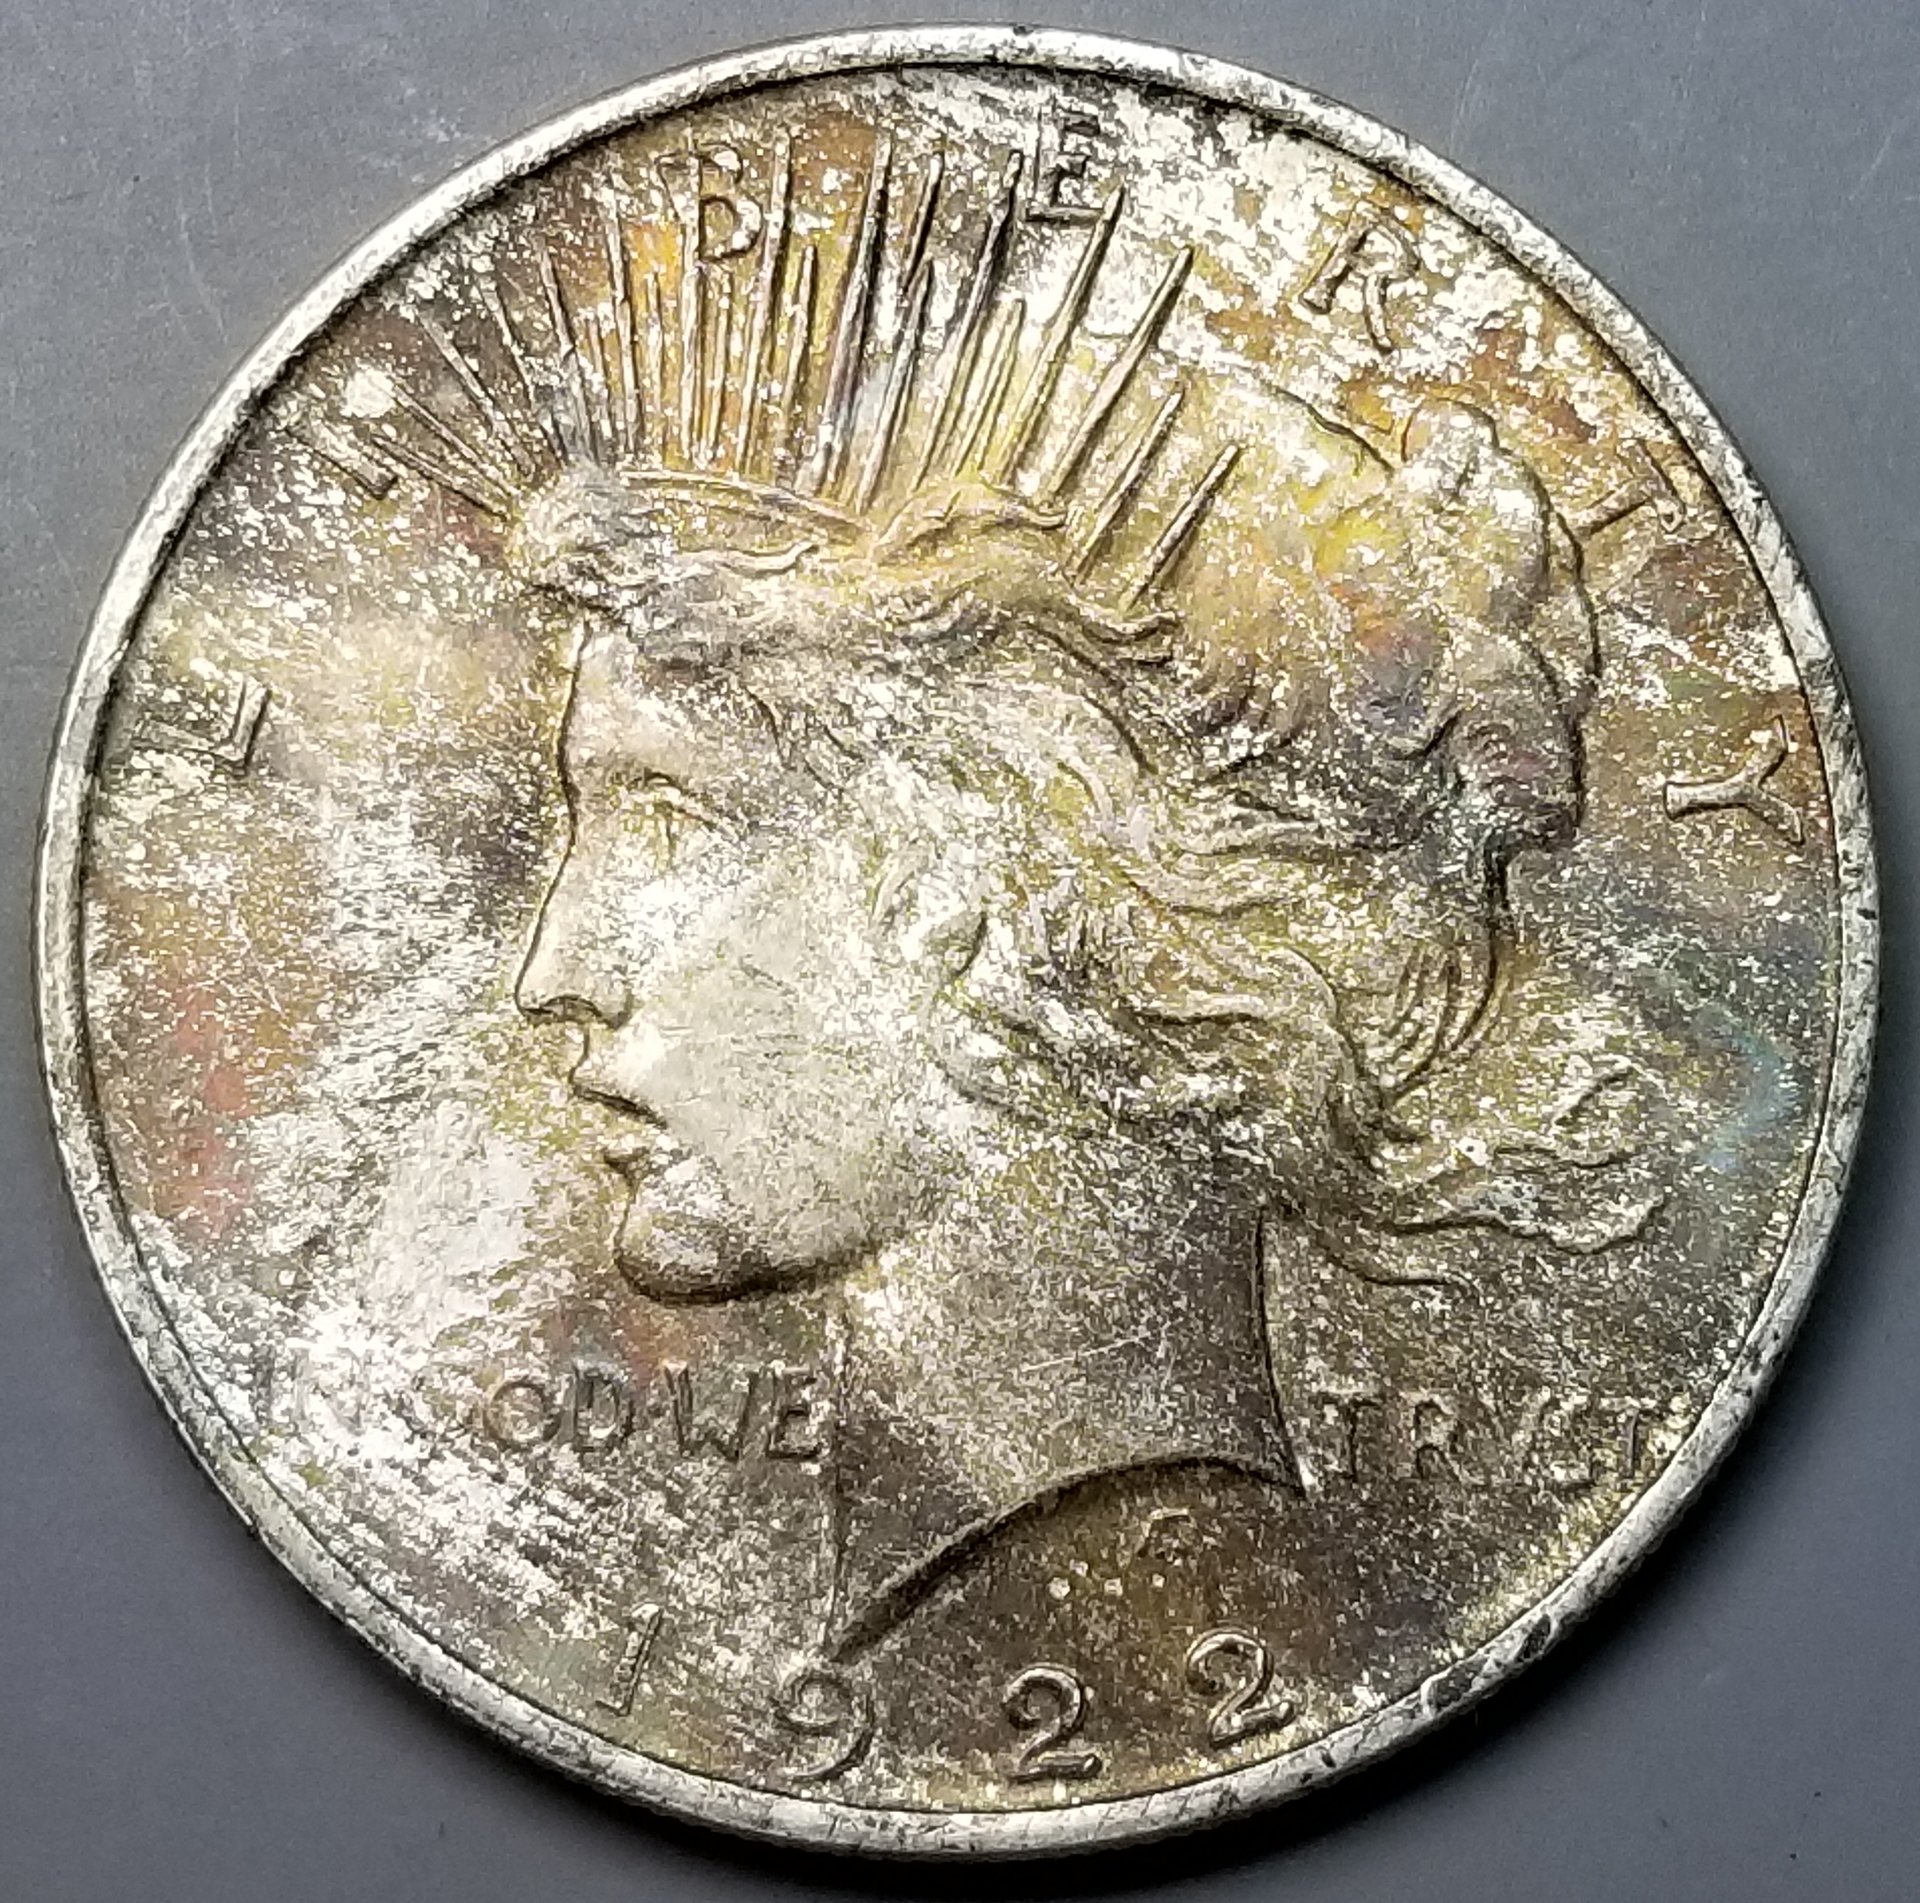 Post your under $50.00 purchase... | Page 76 | Coin Talk